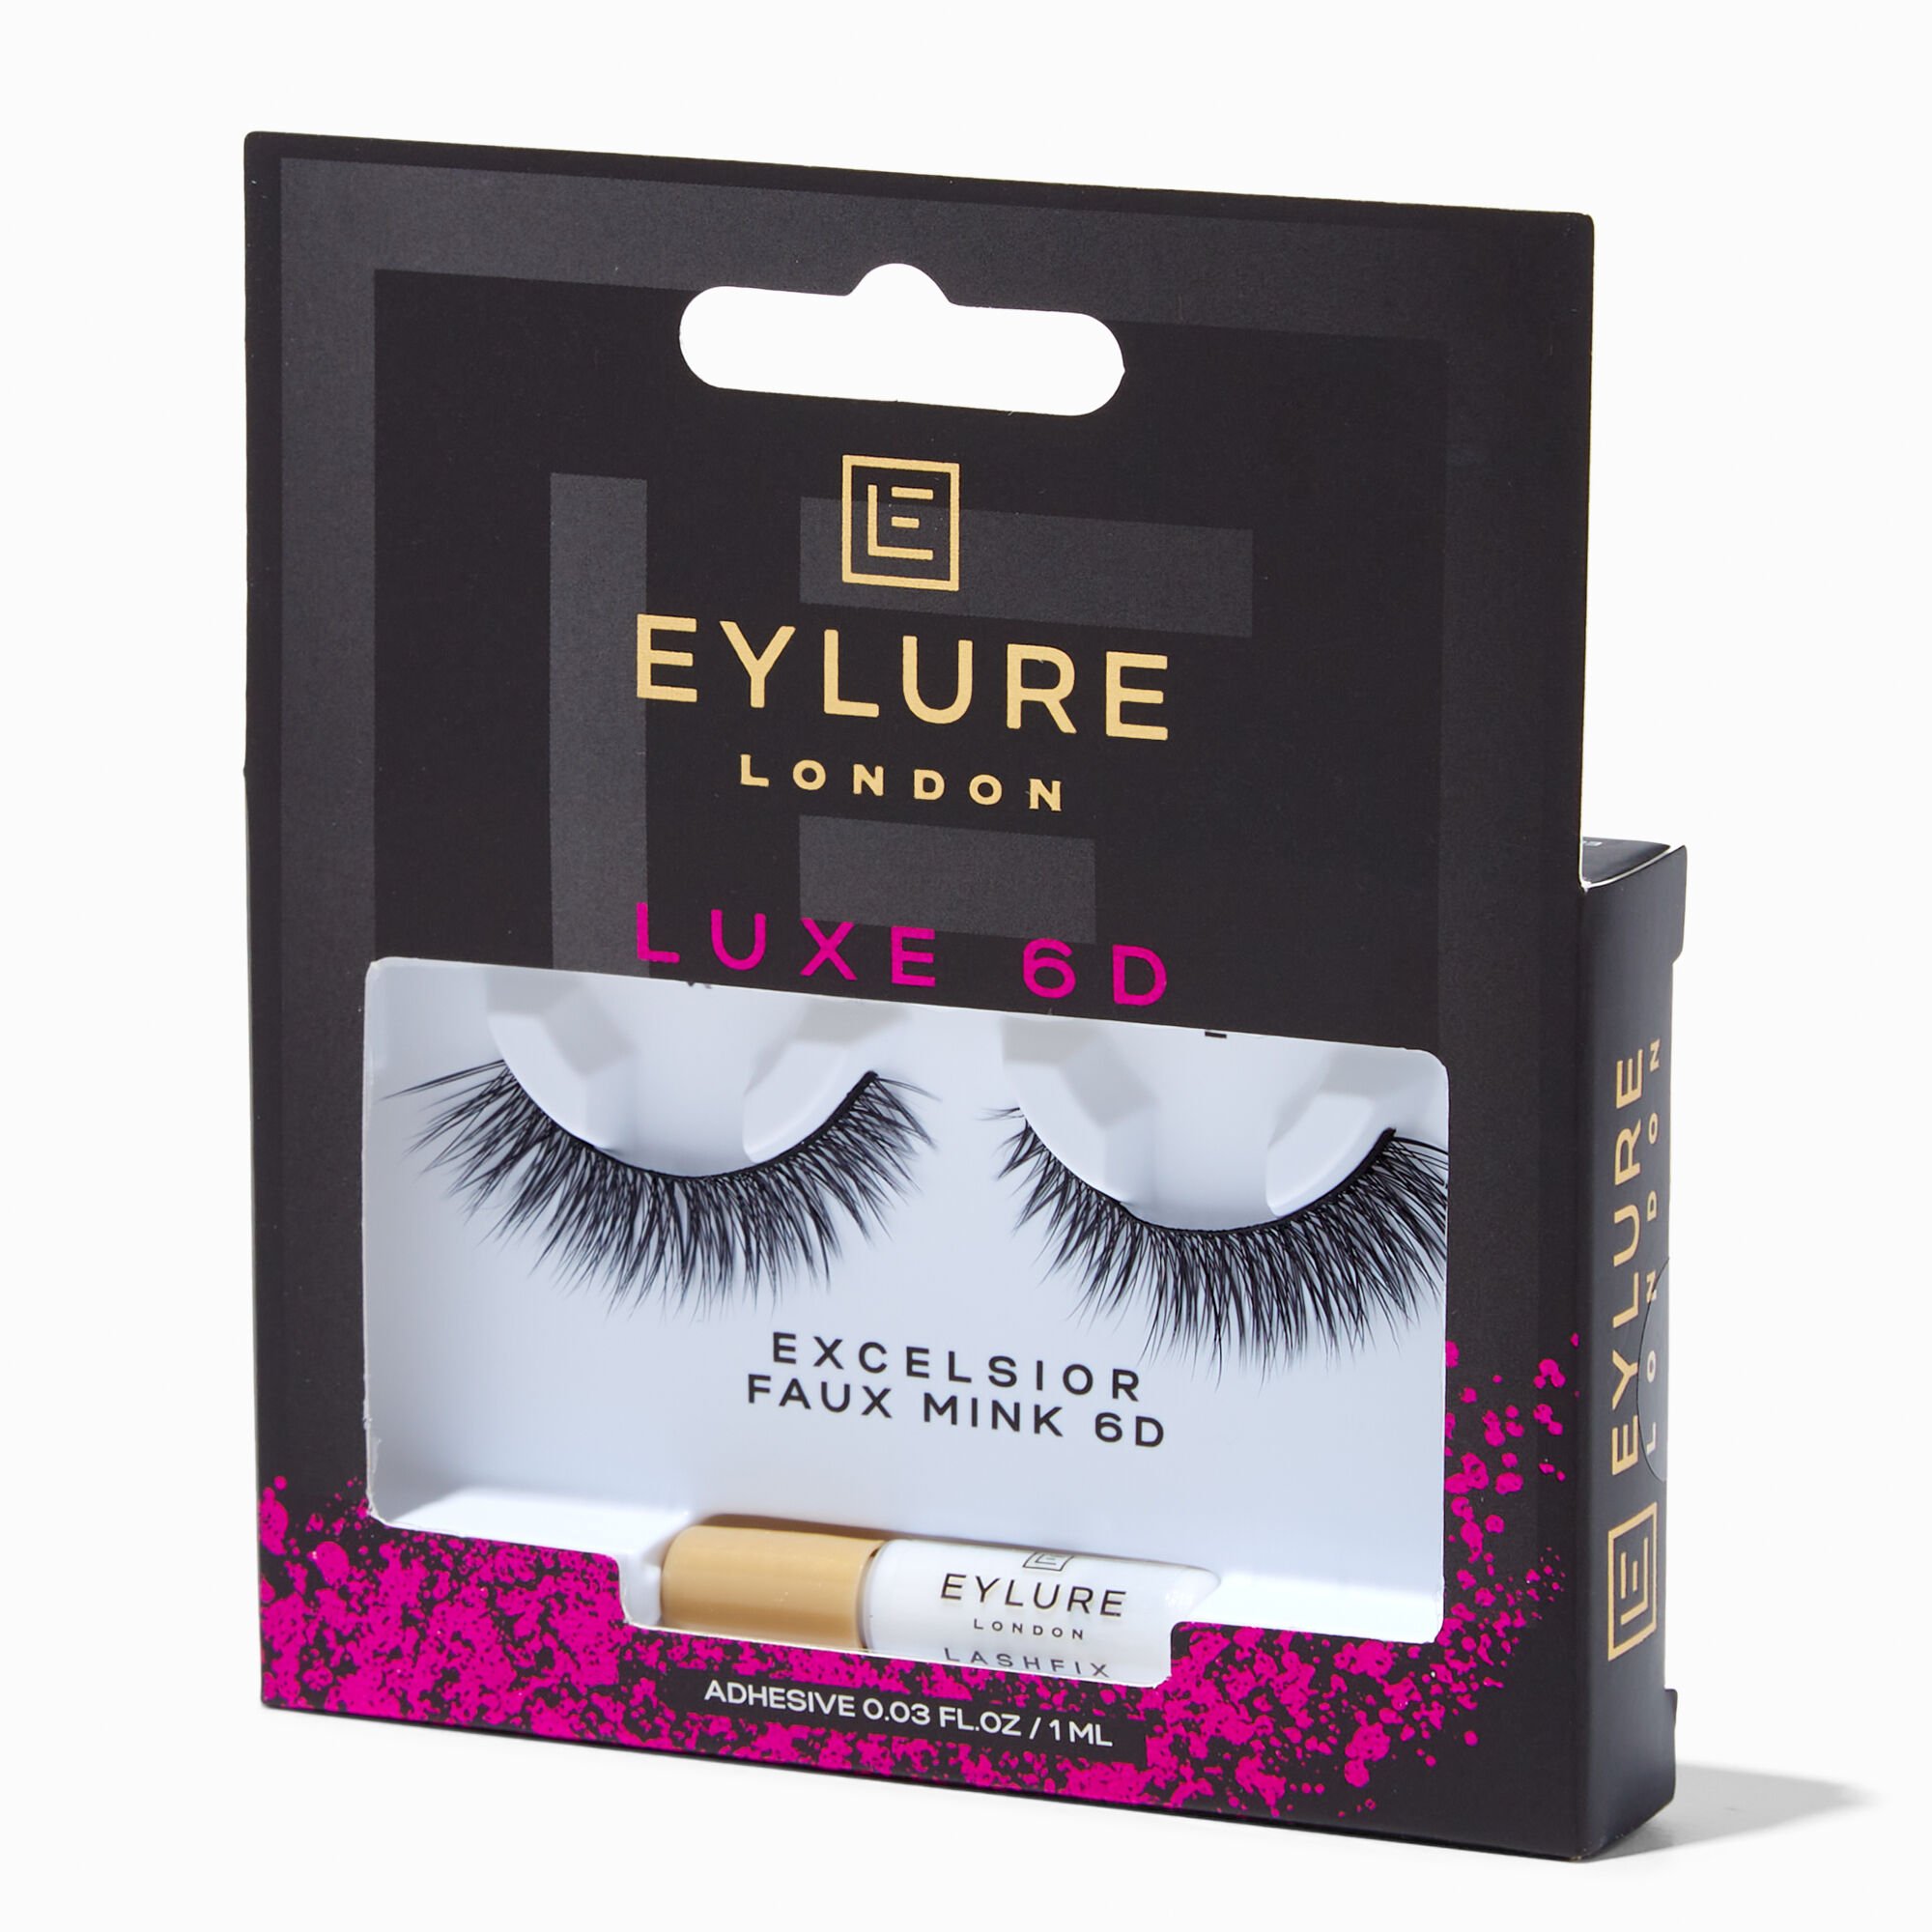 View Claires Eylure Luxe 6D Faux Mink Eyelashes Excelsior Black information